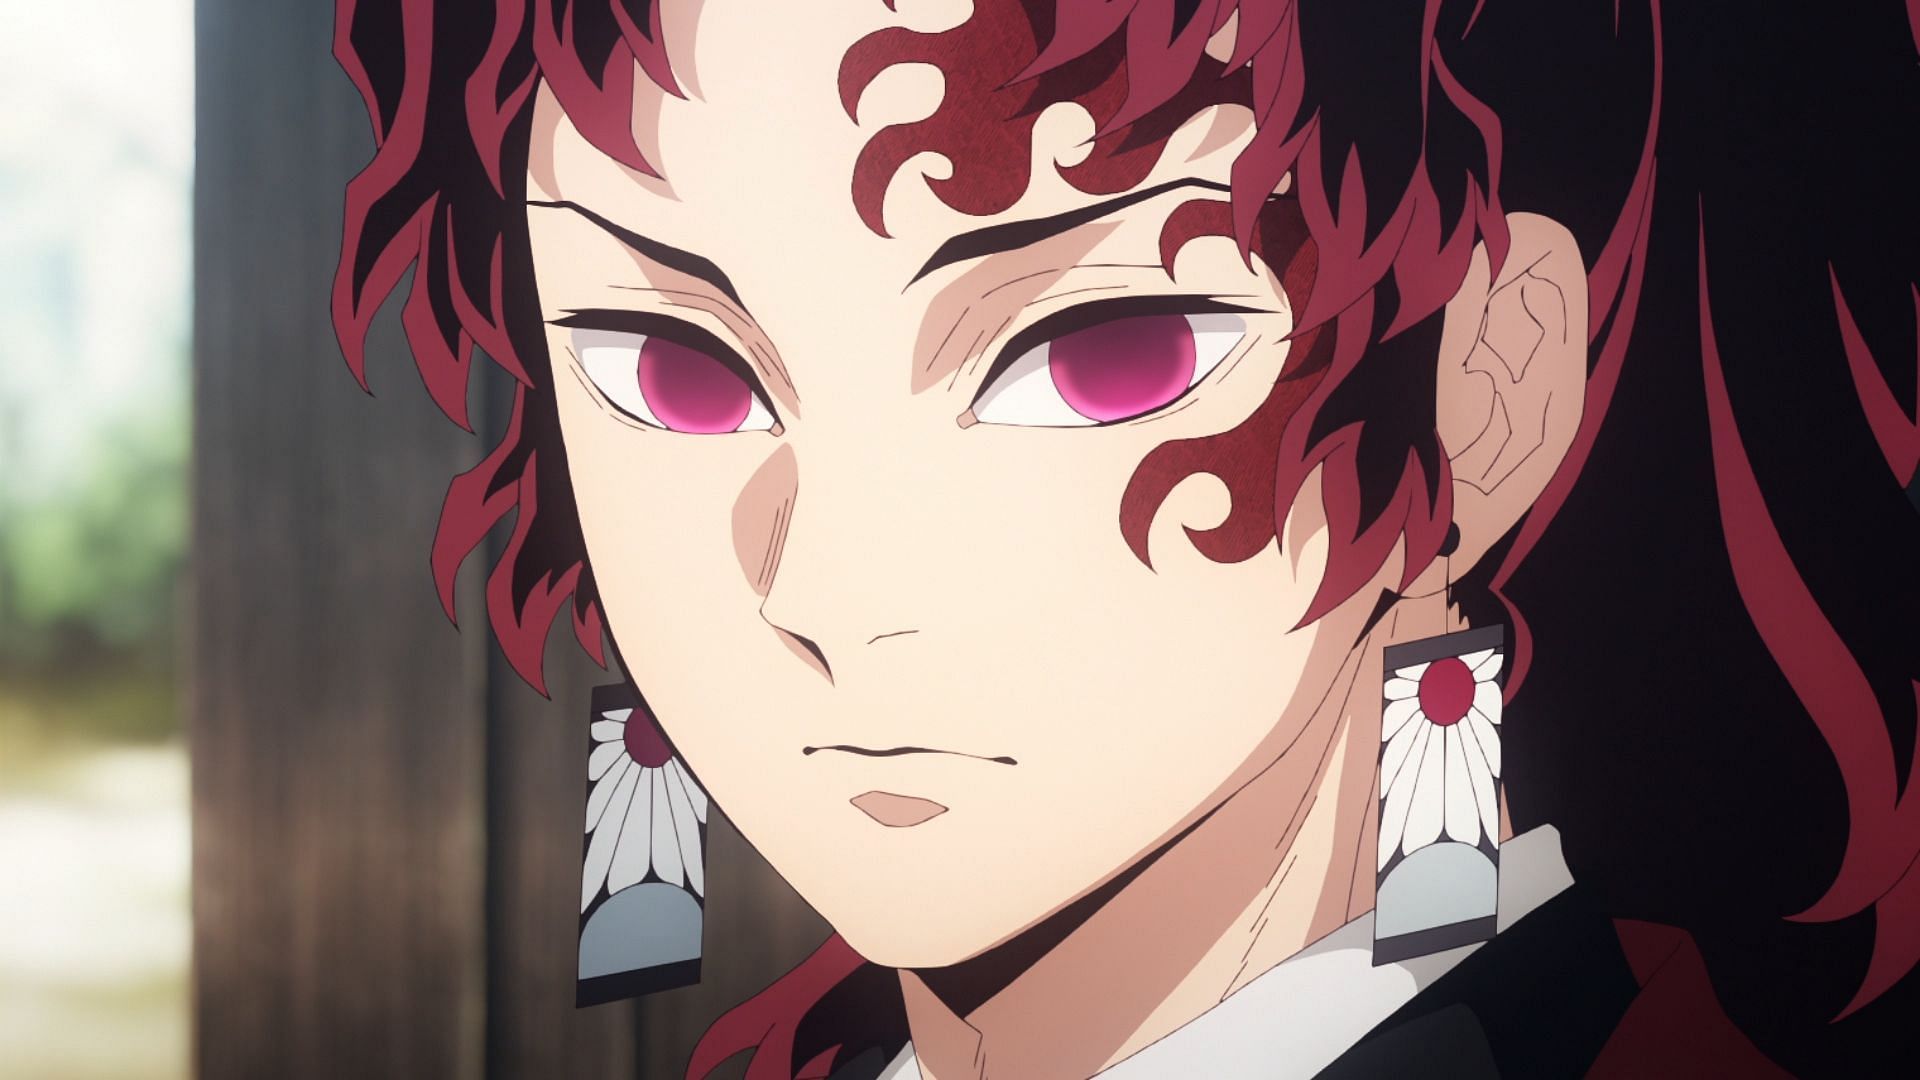 Why was Yoriichi exiled from the Demon Slayer Corps? (Image via Ufotable)